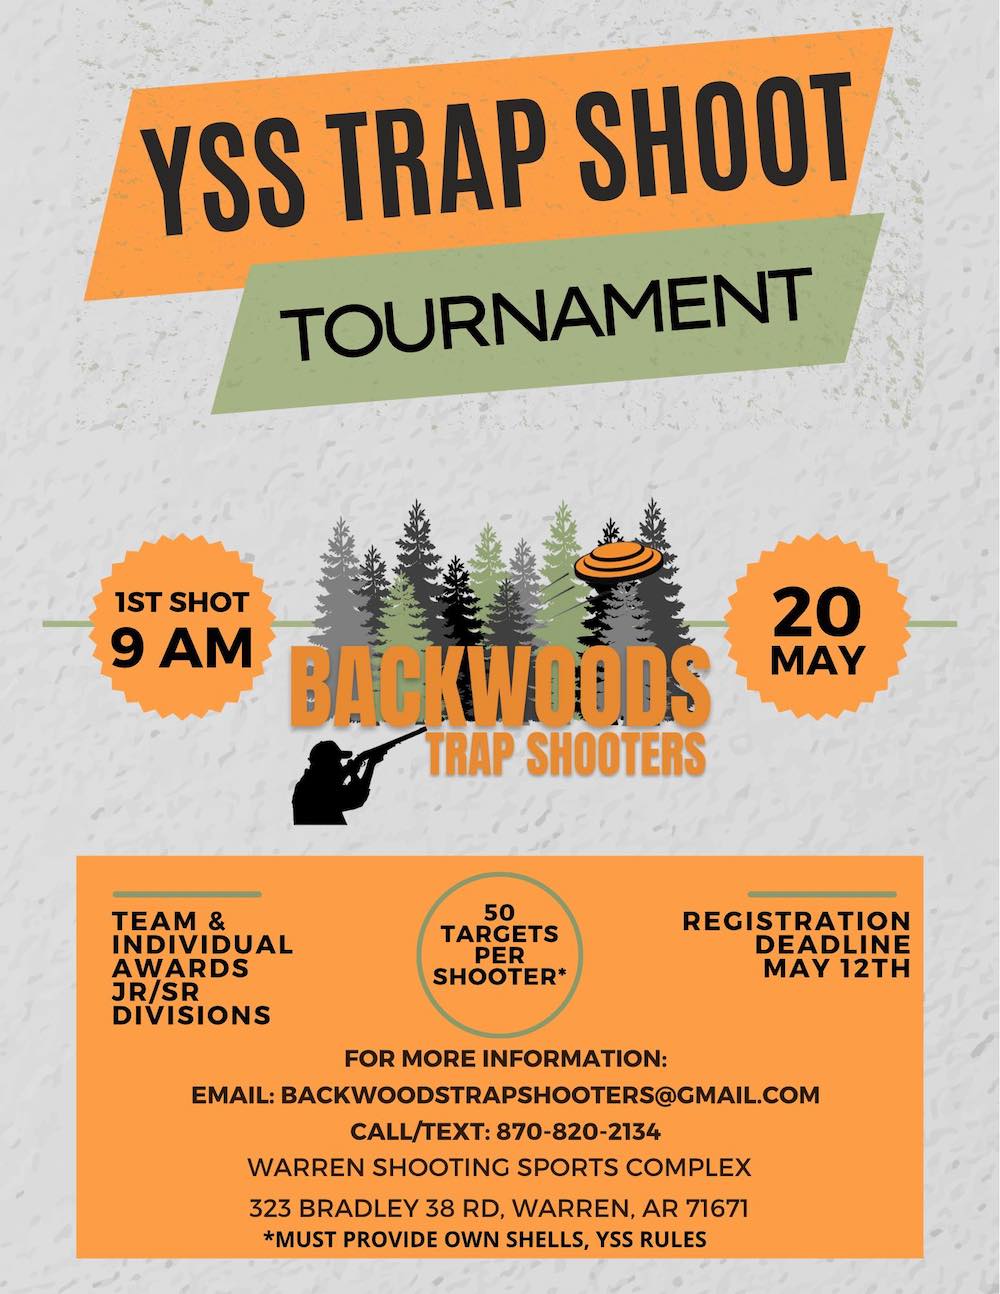 Backwoods Trap Shooters hosting trap tournament May 20